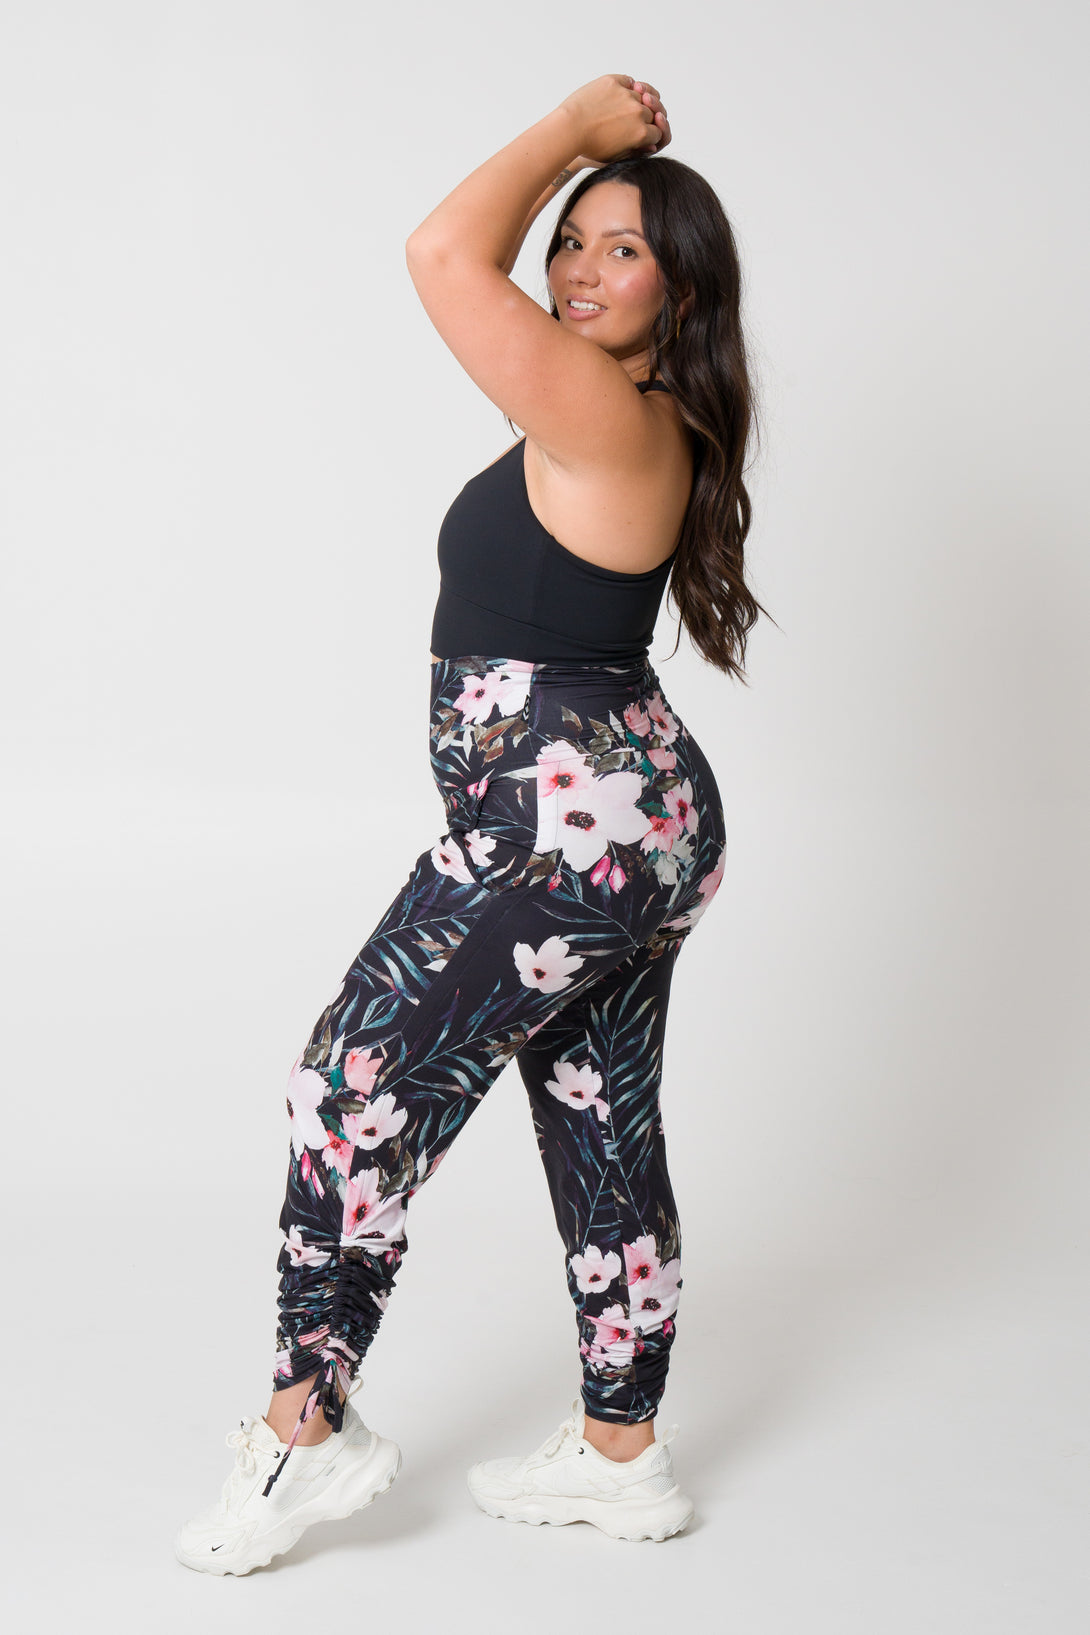 Exotic At Heart Soft To Touch - Jogger Long Tie Sided W/ Pockets - Exoticathletica